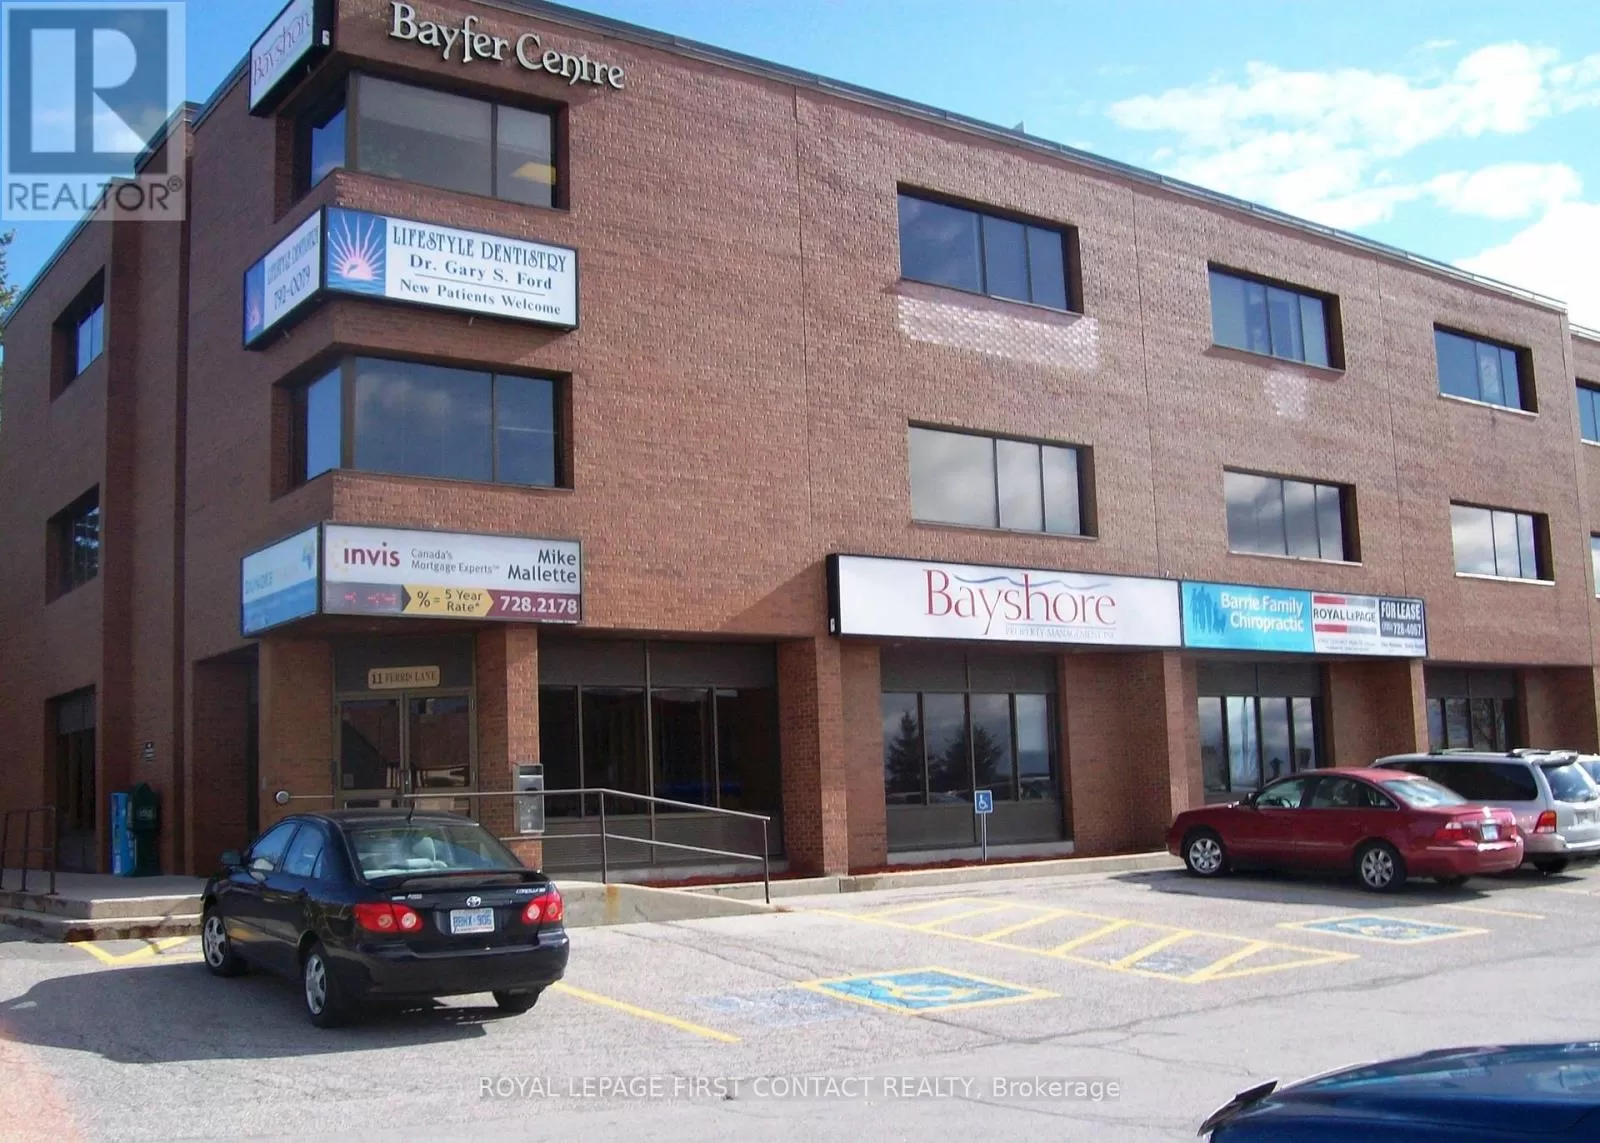 Offices for rent: #201/203 -11 Ferris Lane, Barrie, Ontario L4M 5N6